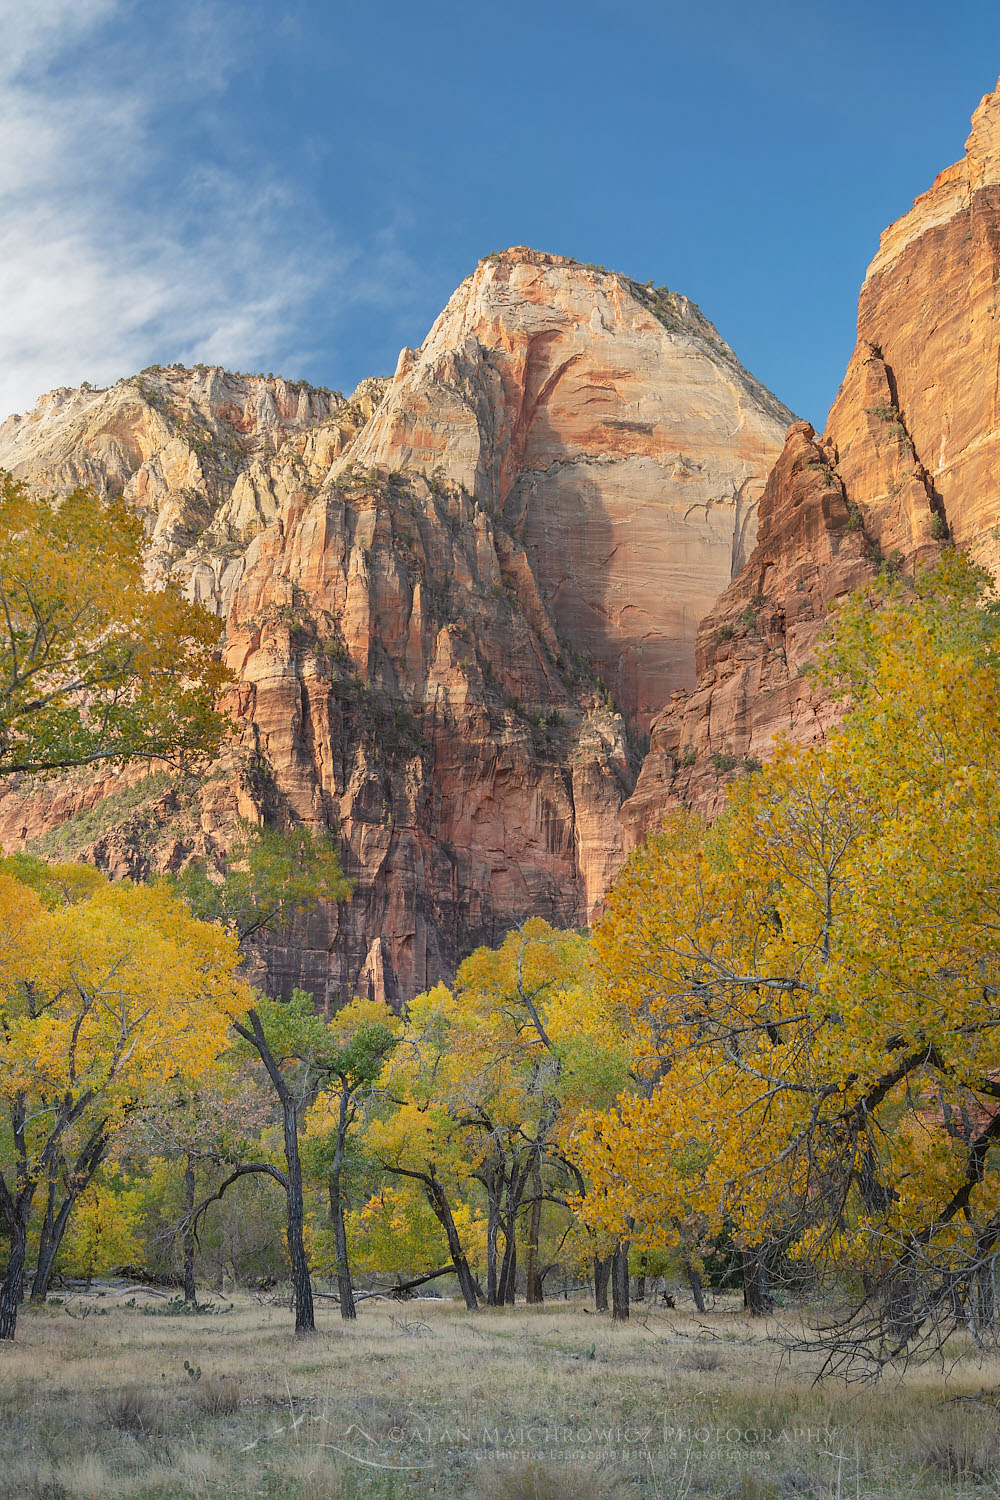 Grove of cottonwood treess in fall color Zion National Park Utah #76685